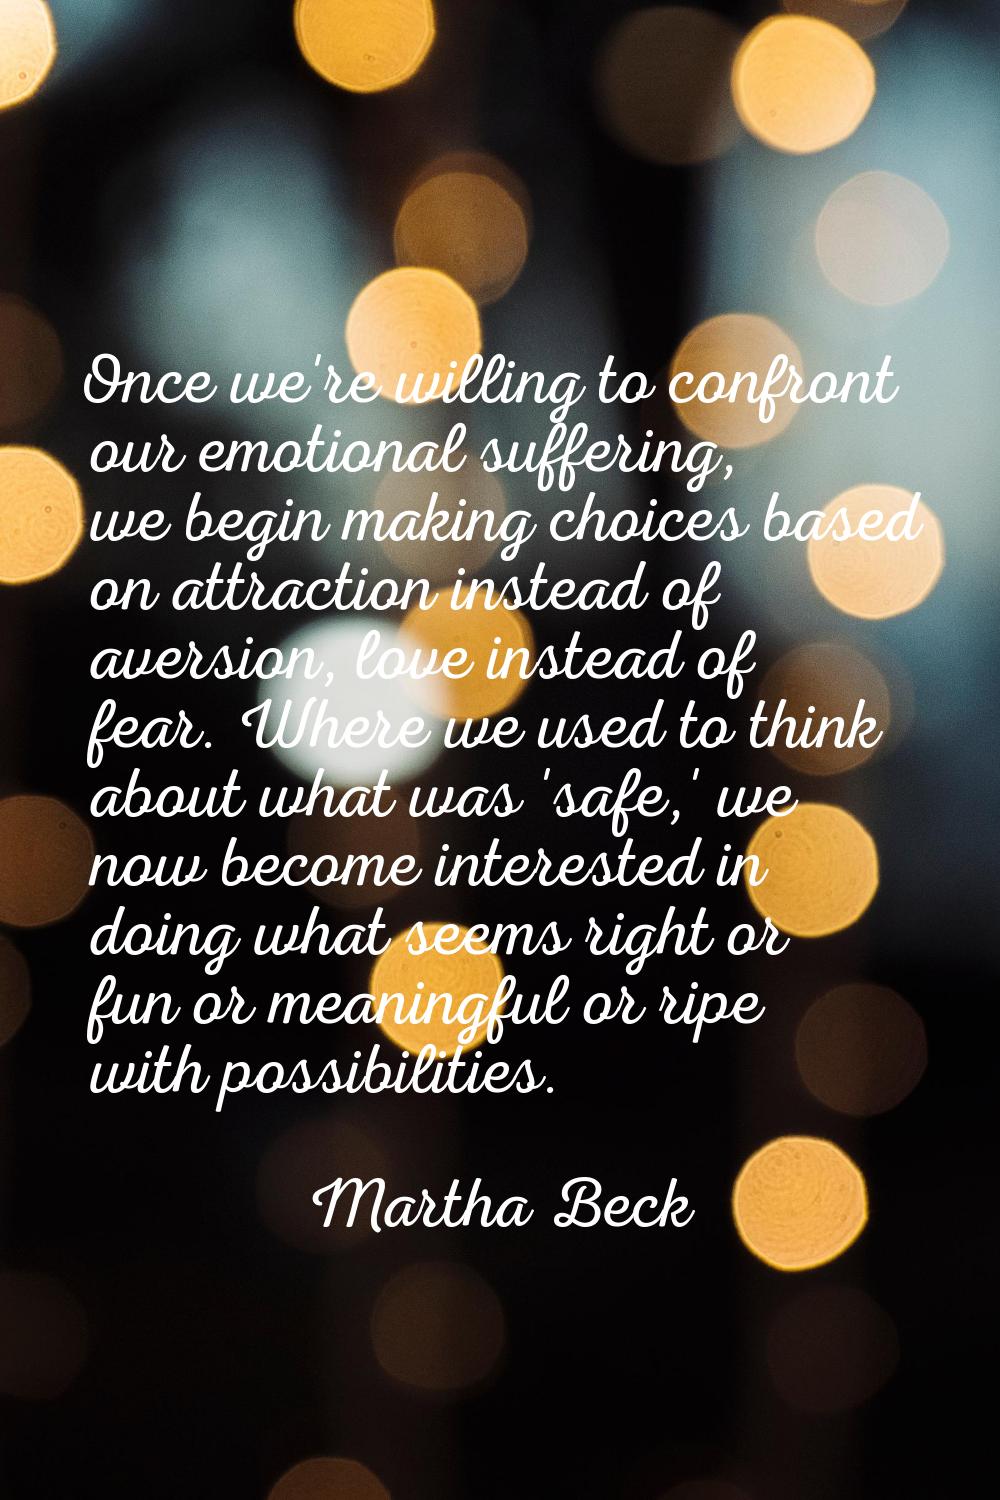 Once we're willing to confront our emotional suffering, we begin making choices based on attraction